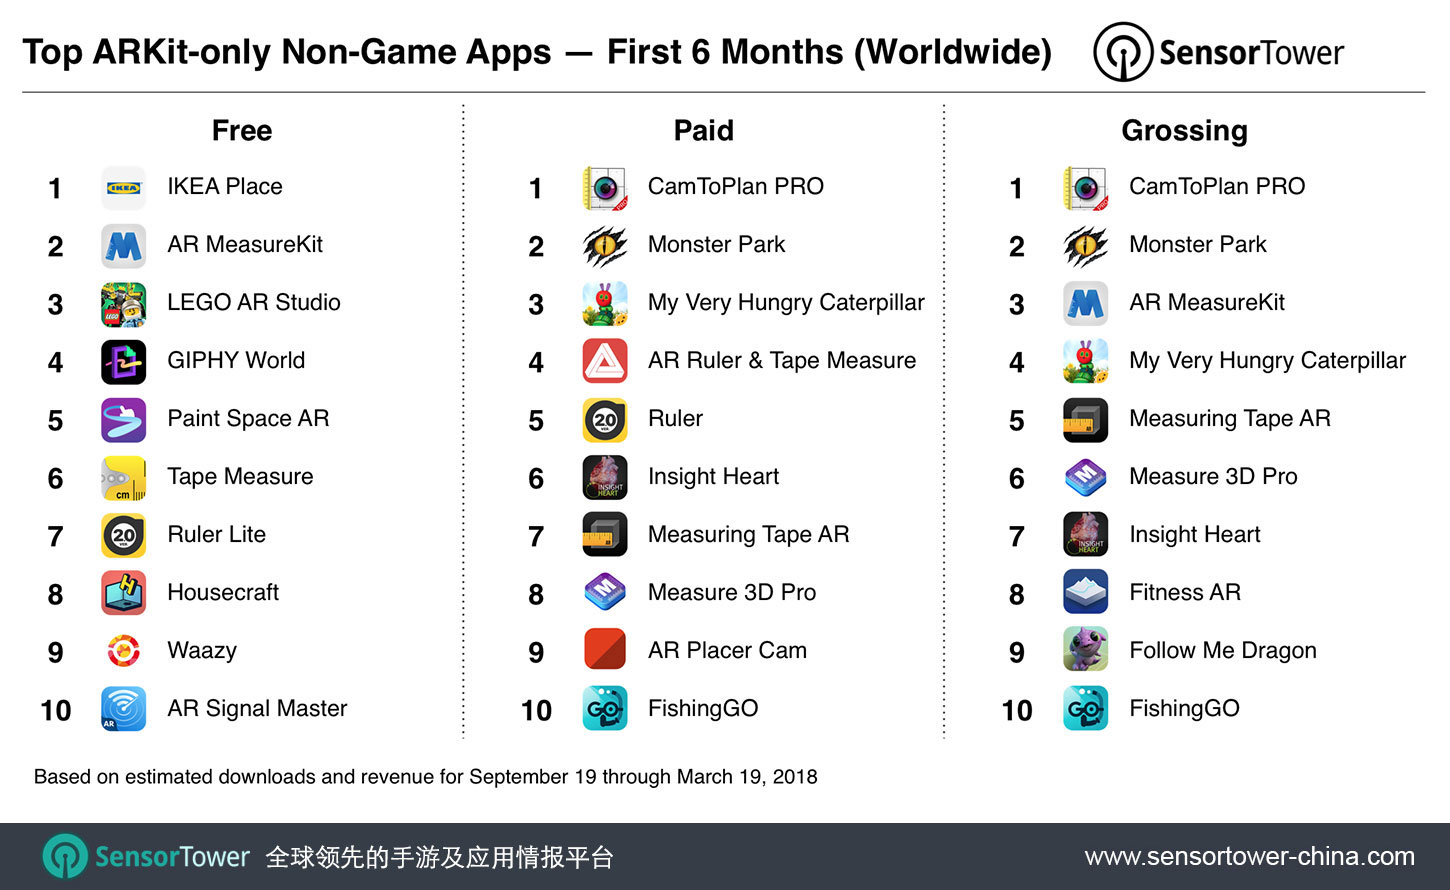 Ranking of top free, paid, and grossing ARKit non-game apps overall for September 19, 2017 to March 19, 2018 CN